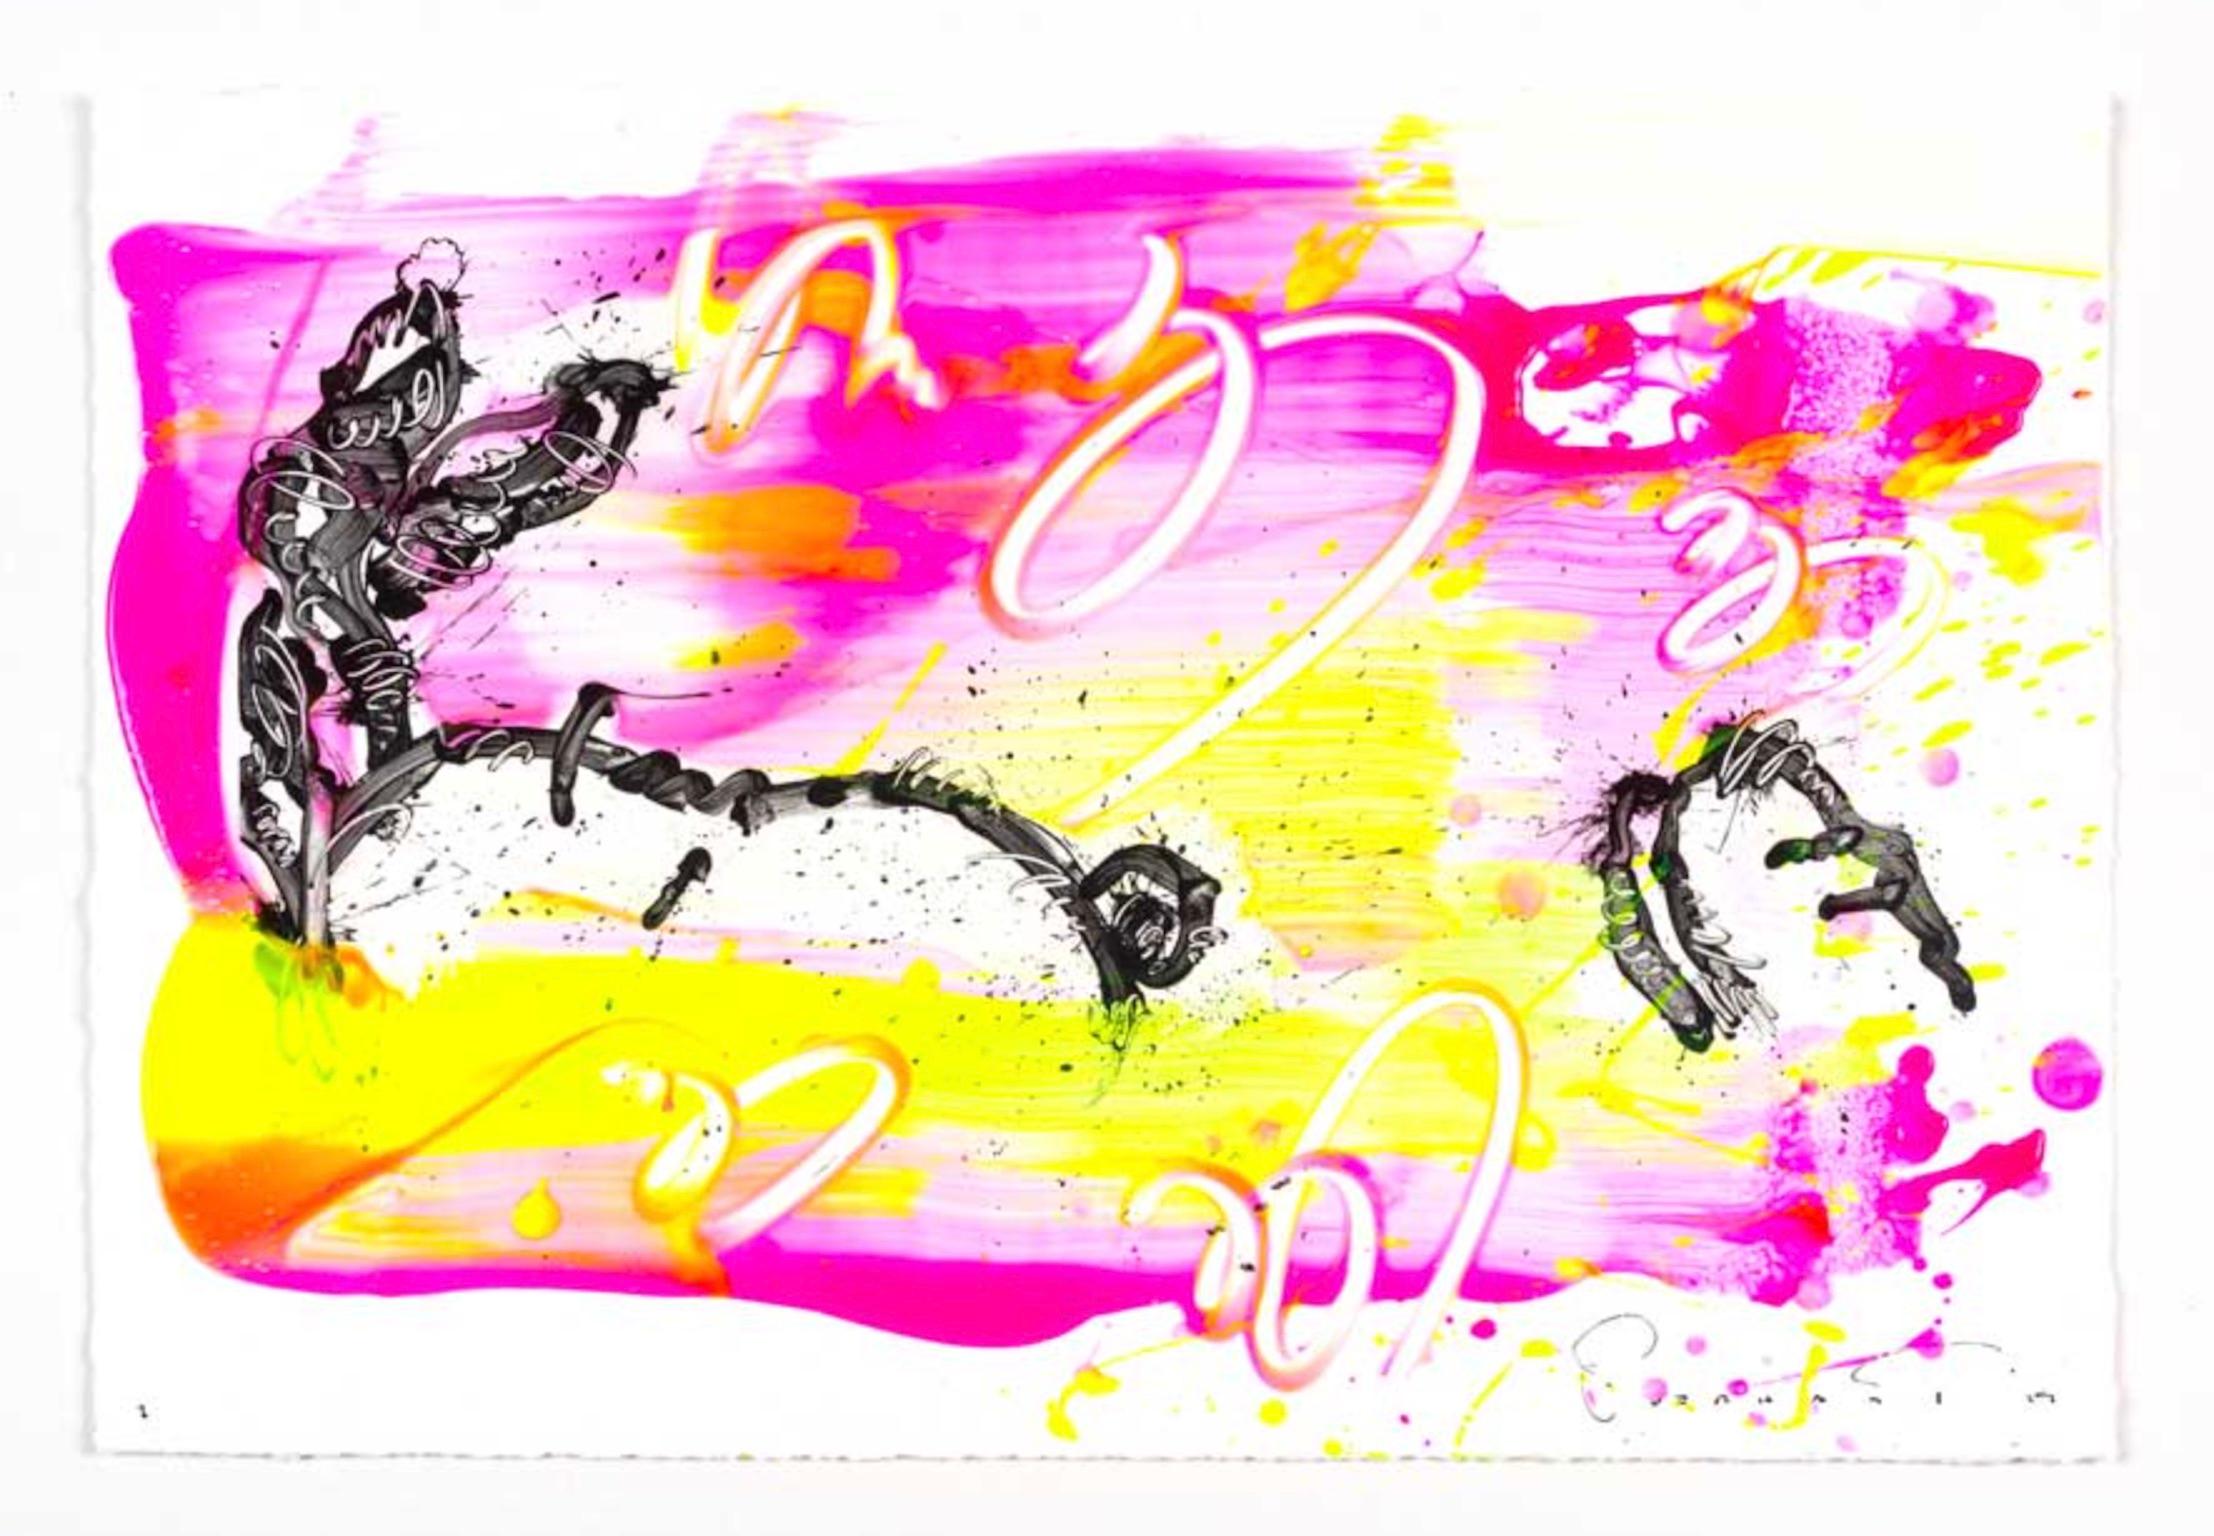 Laid Back No. 1 - Painting by Tom Everhart